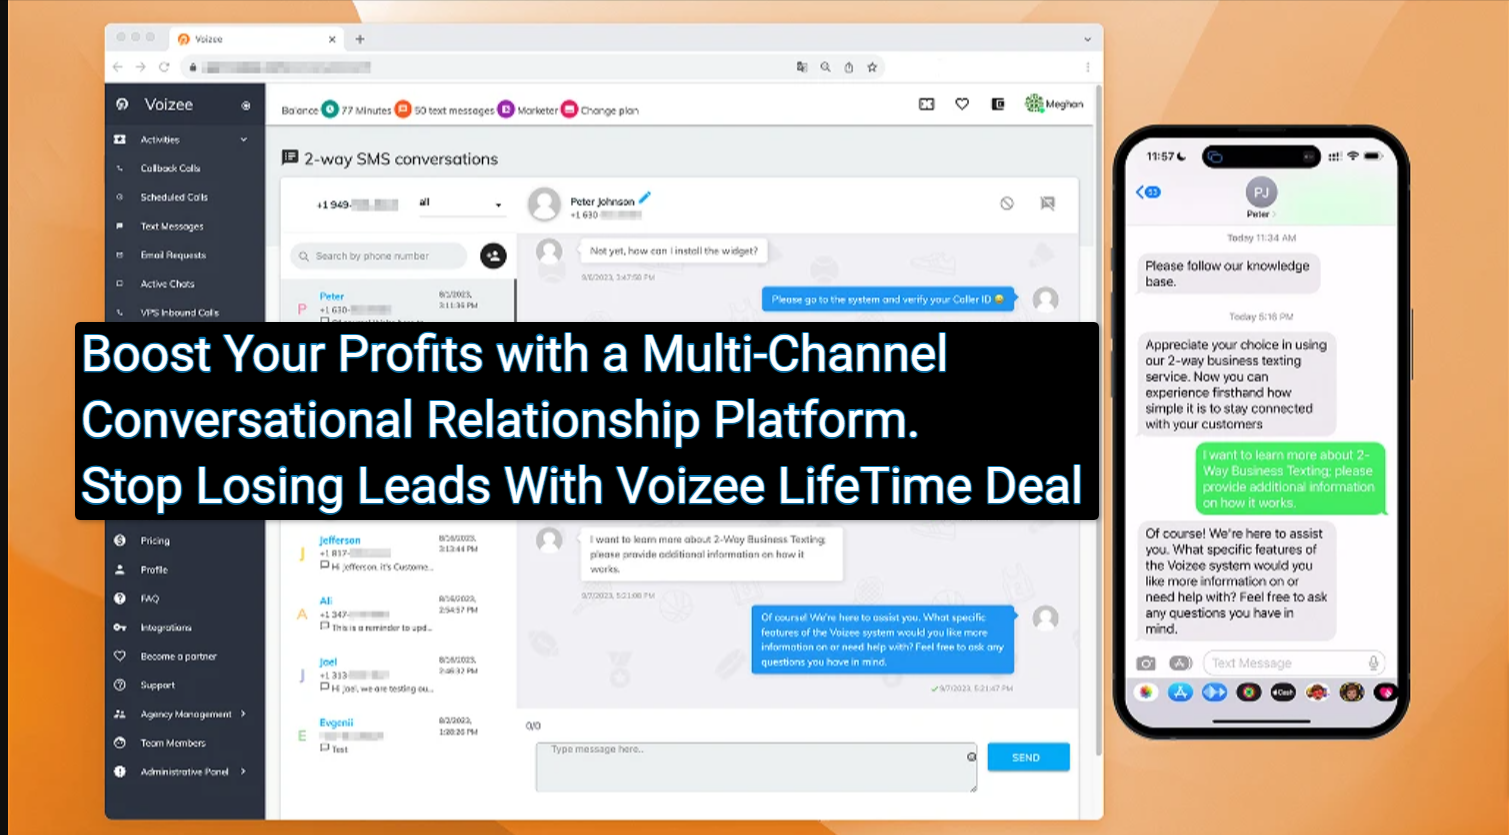 Voizee Review Boost Your Profits with a Multi Channel Conversational Relationship Platform. Stop Losing Leads With Voizee LifeTime Deal Voizee Review: Boost Your Profits with a Multi-Channel Conversational Relationship Platform. Stop Losing Leads With Voizee LifeTime Deal